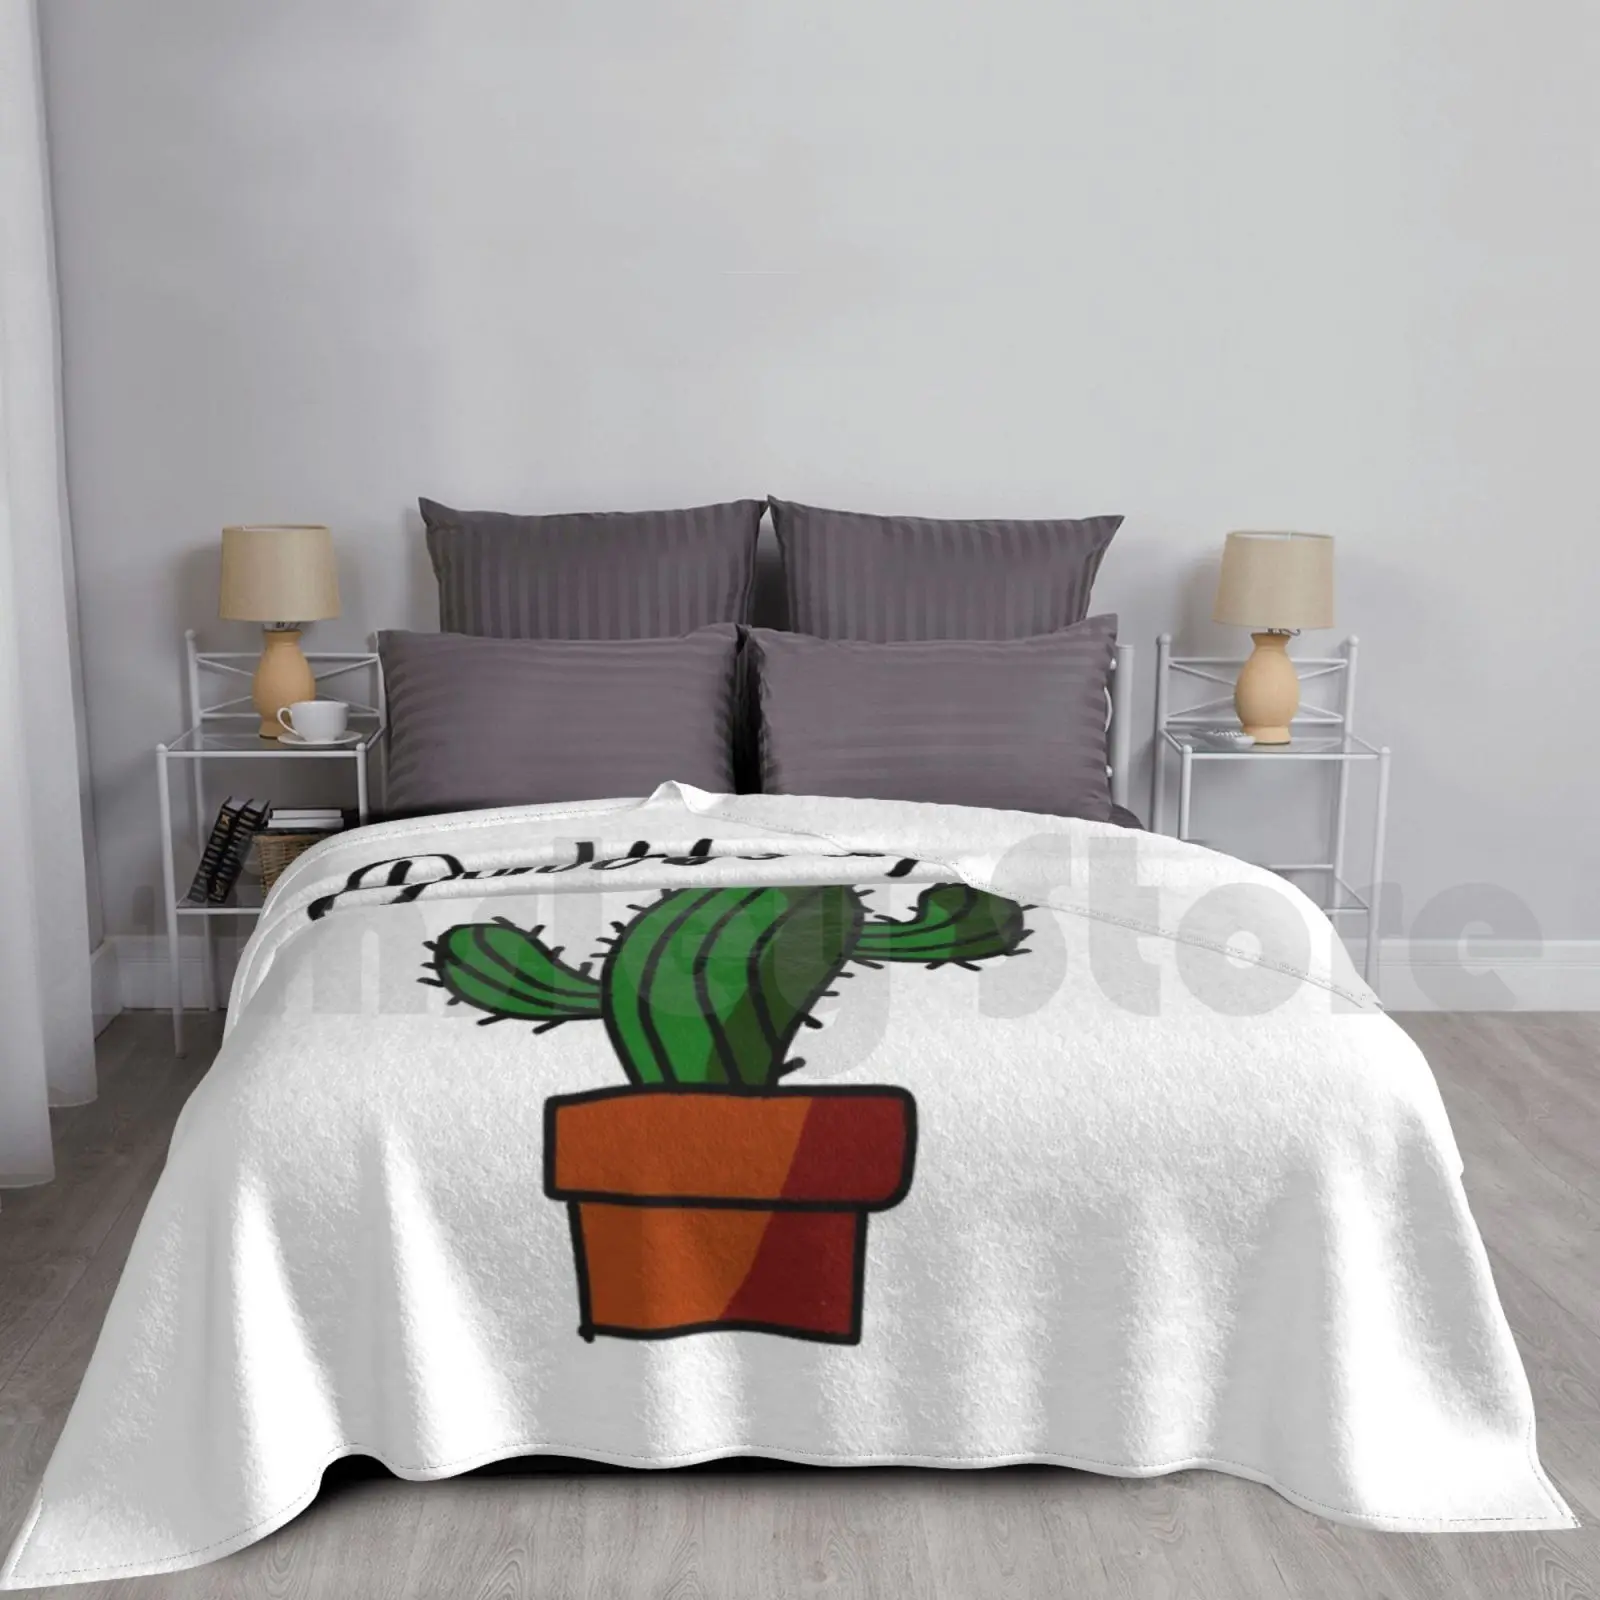 

Don't Be A Prick Cactus Joke Blanket For Sofa Bed Travel Prick Cactus Green Brown Text Joke Funny Plants Plant